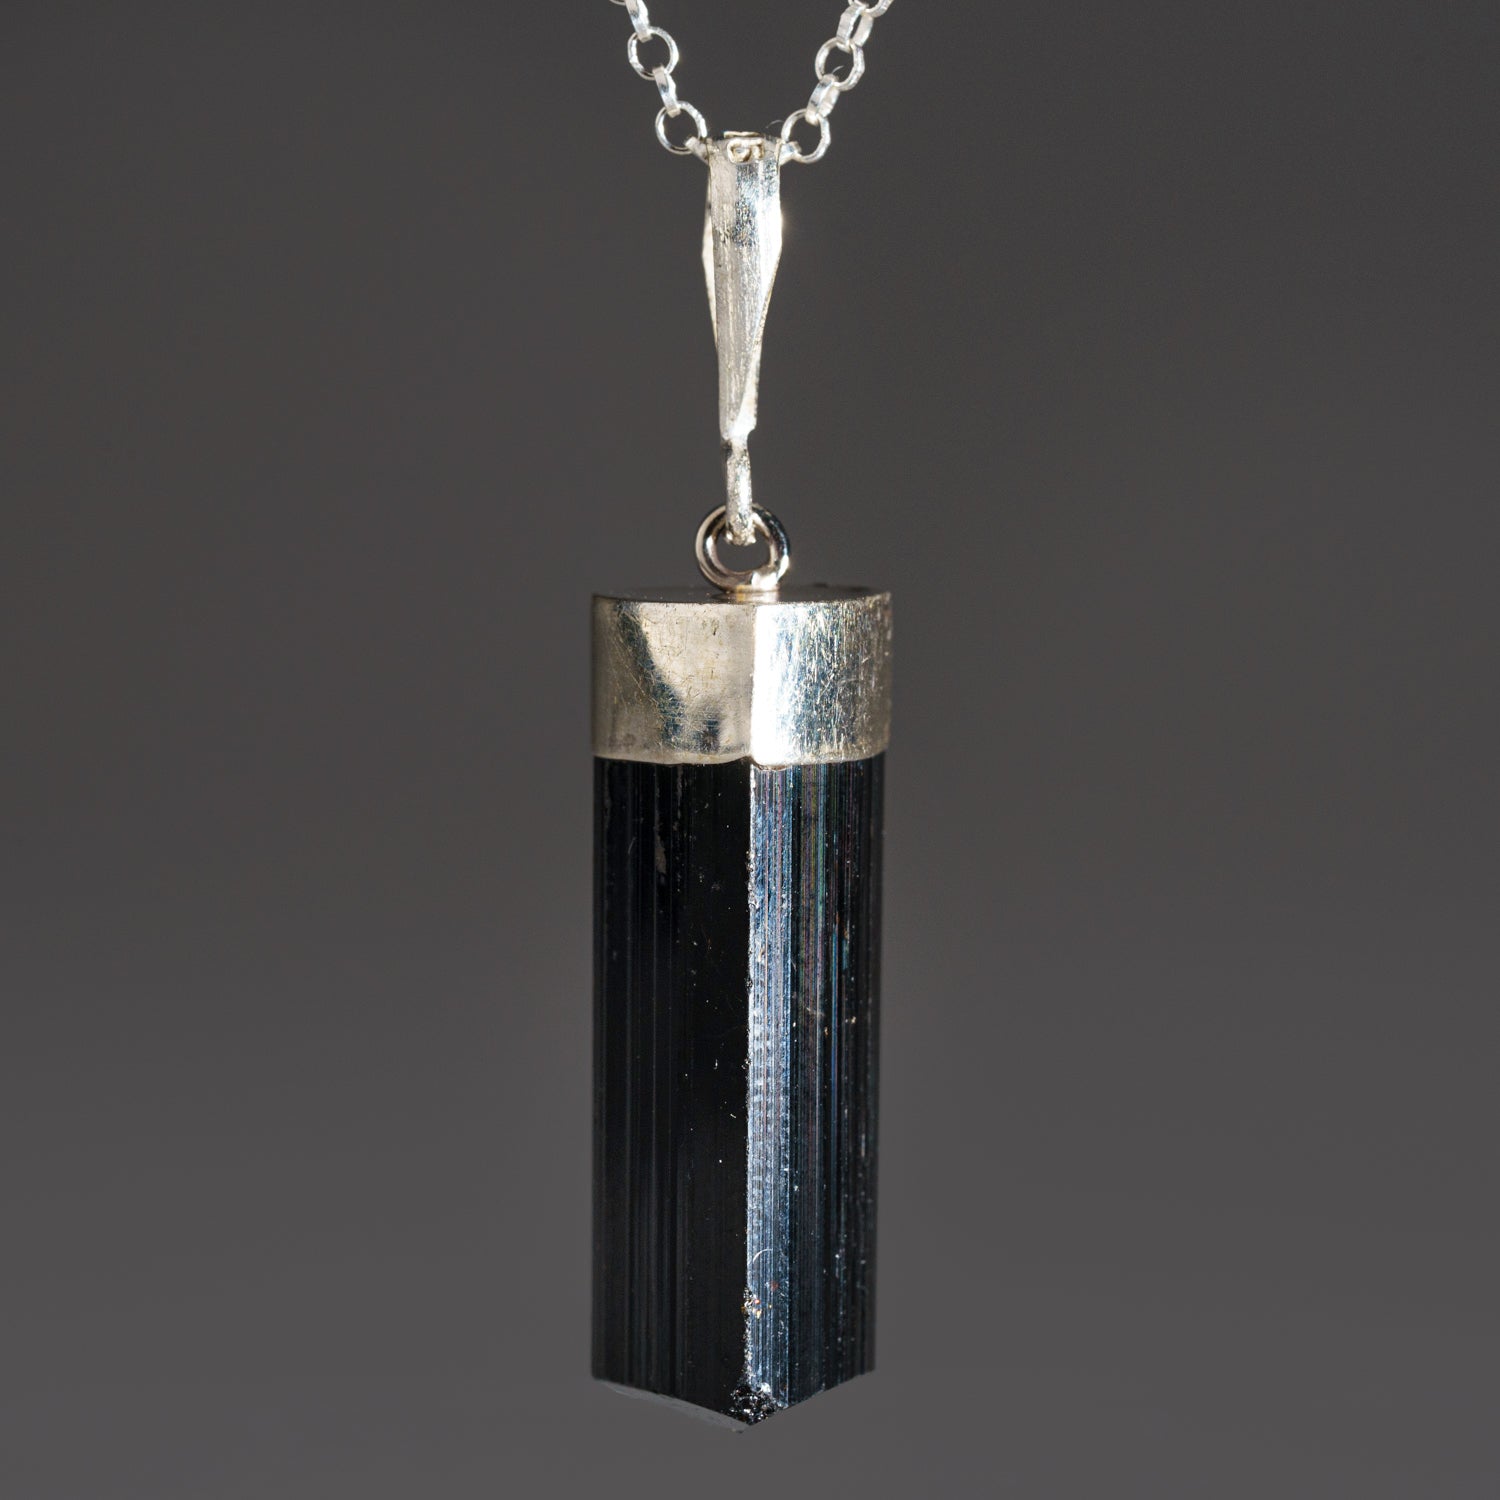 Genuine Black Tourmaline Pendant (6-9 grams) with 18" Sterling Silver Chain